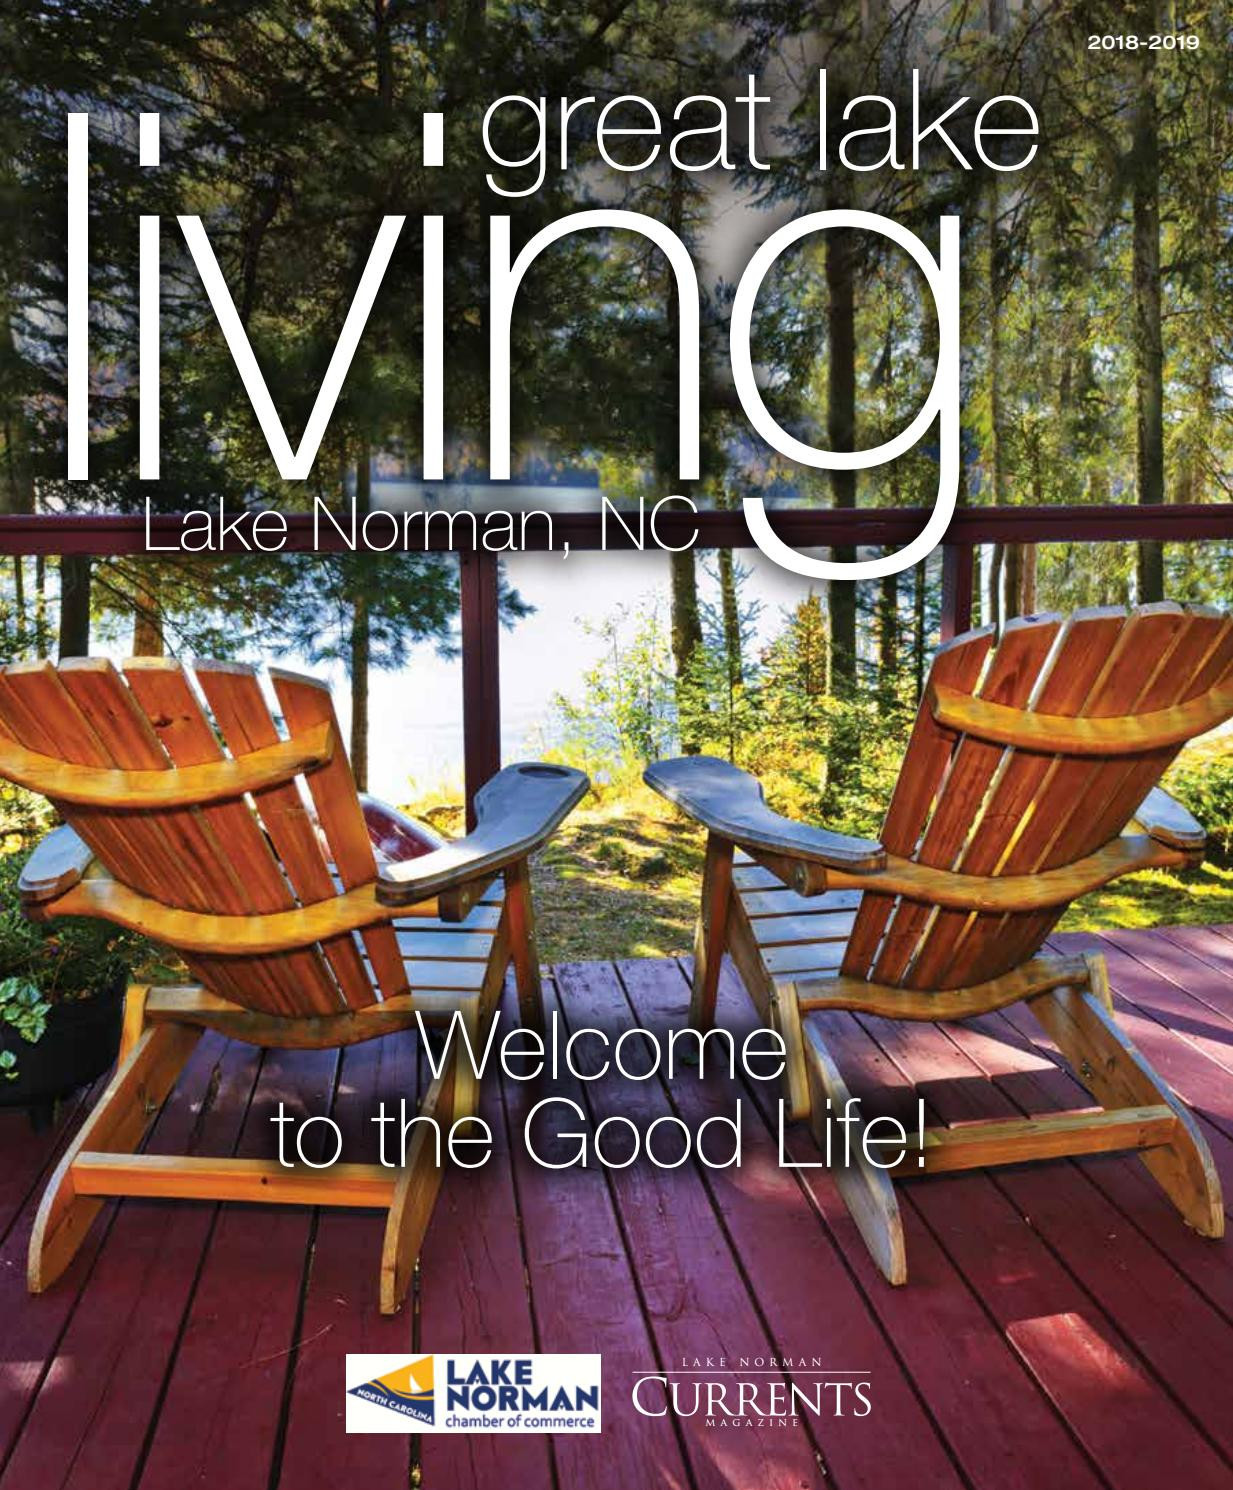 halton hickory hardwood flooring of great lake living 2018 2019 by lake norman currents issuu throughout page 1